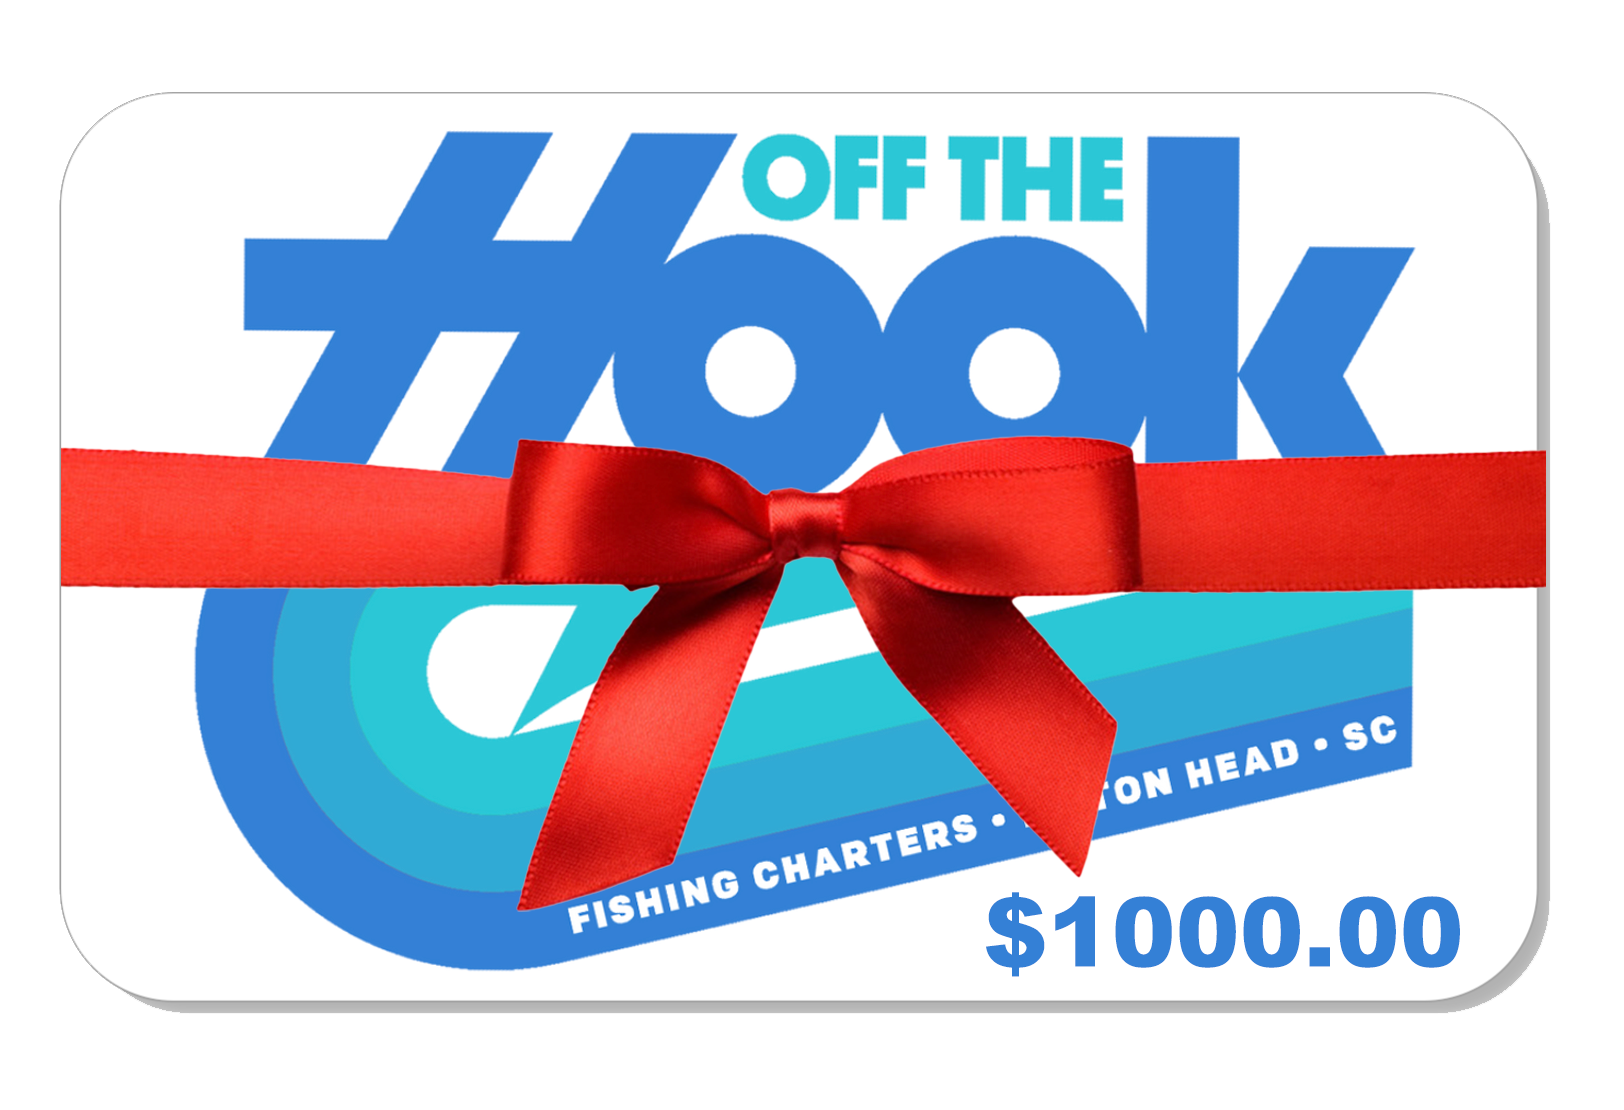 OFF THE HOOK FISHING CHARTERS GIFT CARD - Off The Hook Fishing Charters